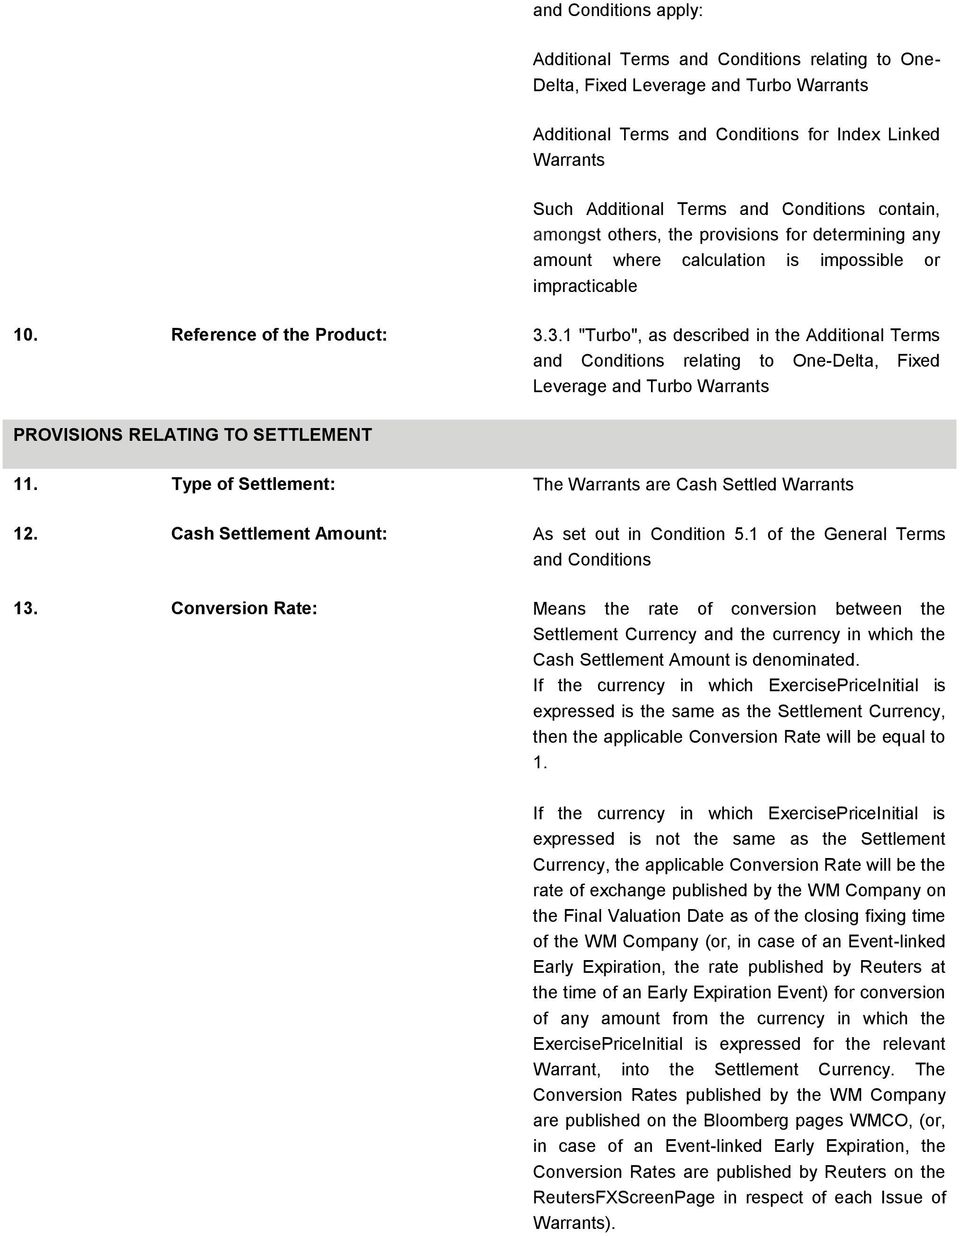 3.1 "Turbo", as described in the Additional Terms and Conditions relating to One-Delta, Fixed Leverage and Turbo Warrants PROVISIONS RELATING TO SETTLEMENT 11.